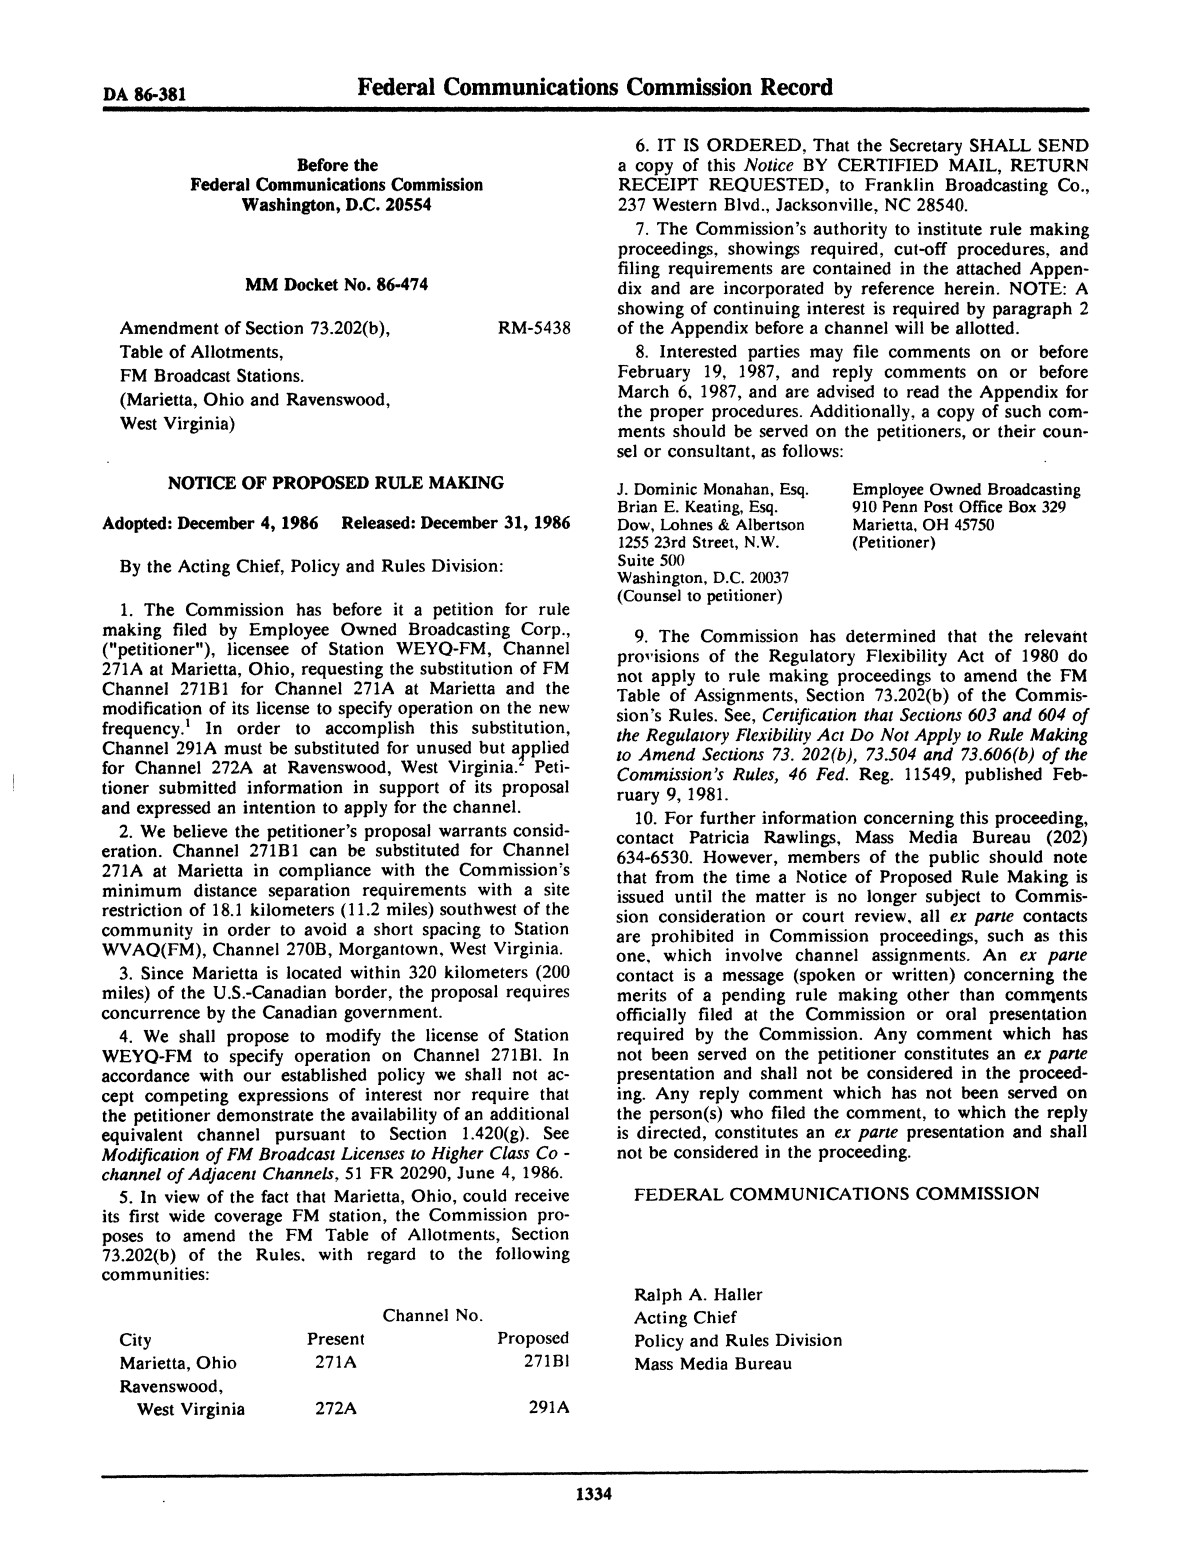 FCC Record, Volume 1, No. 7, Pages 1267 to 1368, December 22, 1986 - January 2, 1987
                                                
                                                    1334
                                                